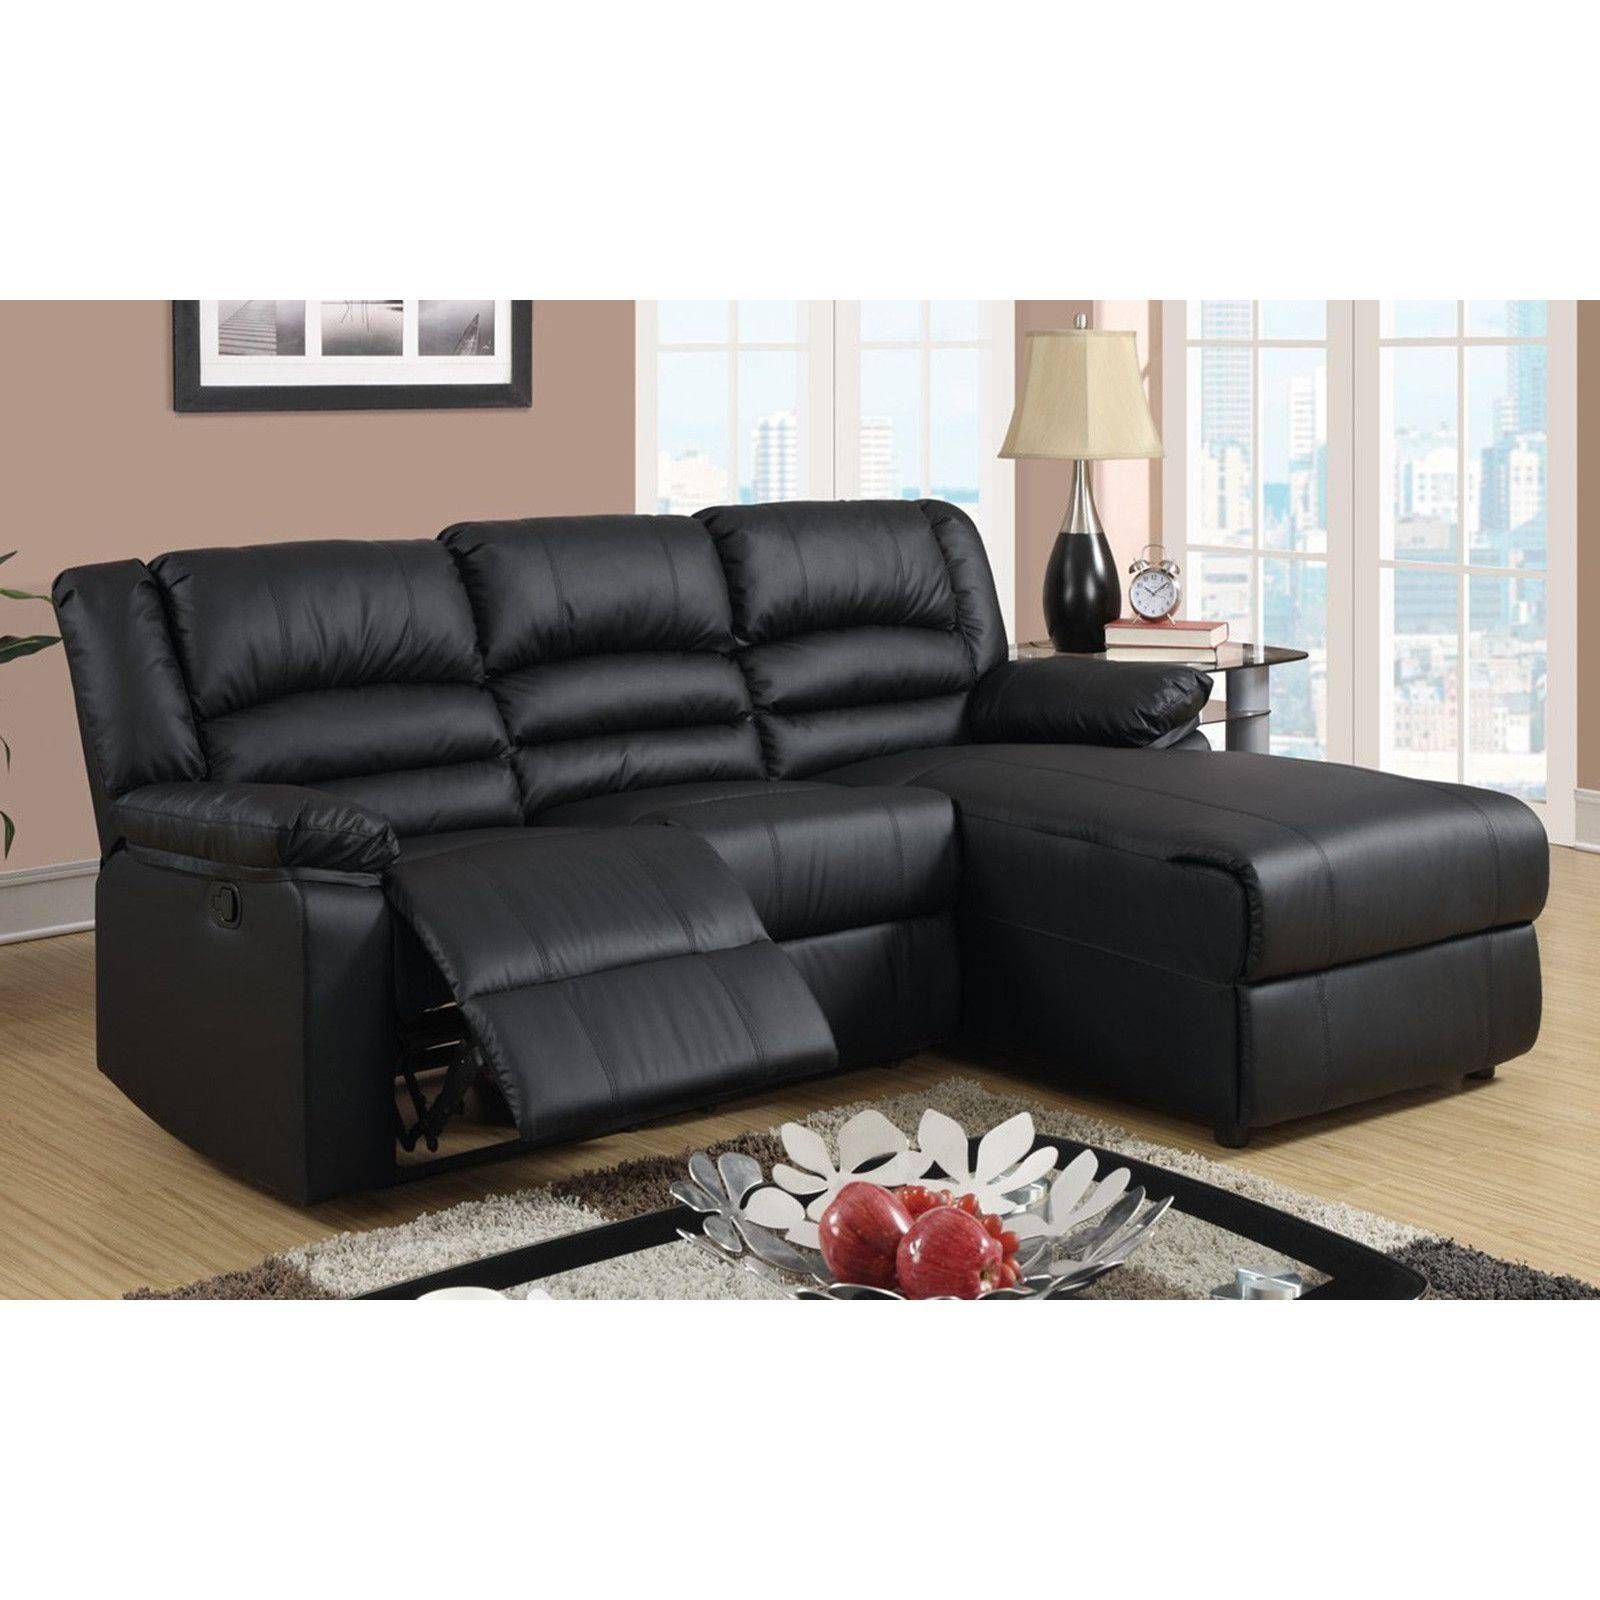 Furniture: Reclining Sectional Sofa | Sectional Reclining Sofas Throughout Curved Recliner Sofa (View 28 of 30)